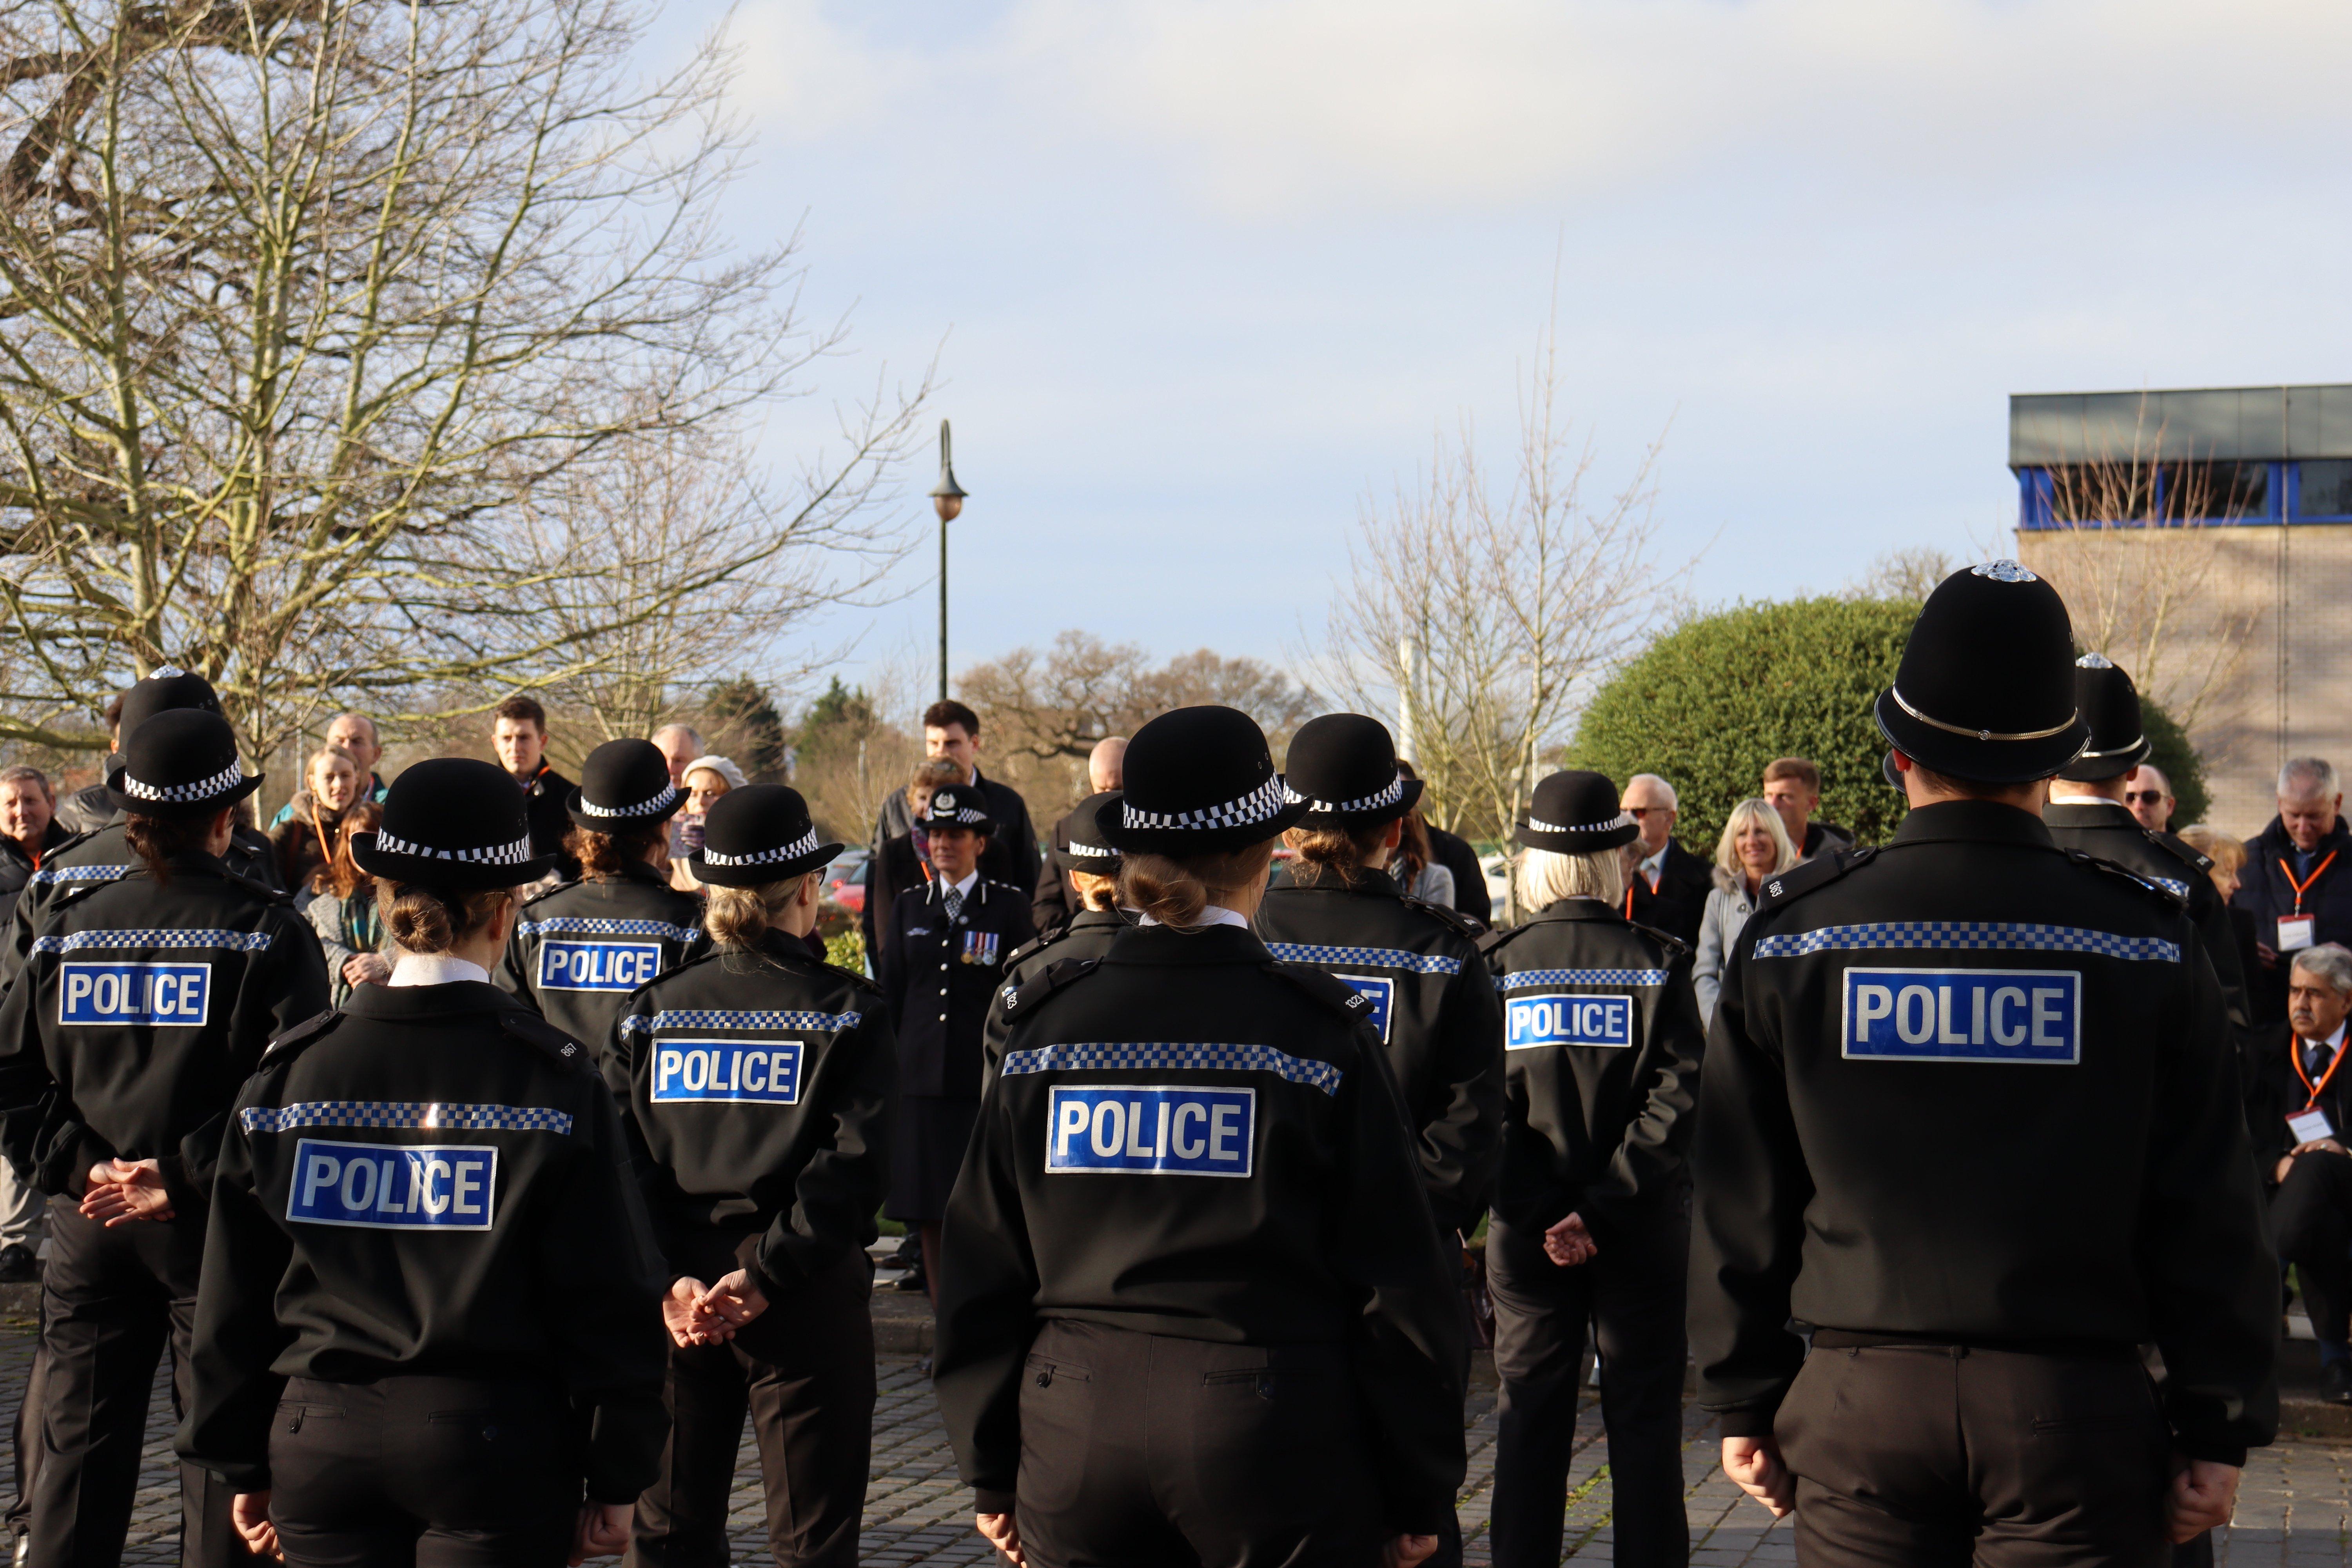 New officers are welcomed to the force